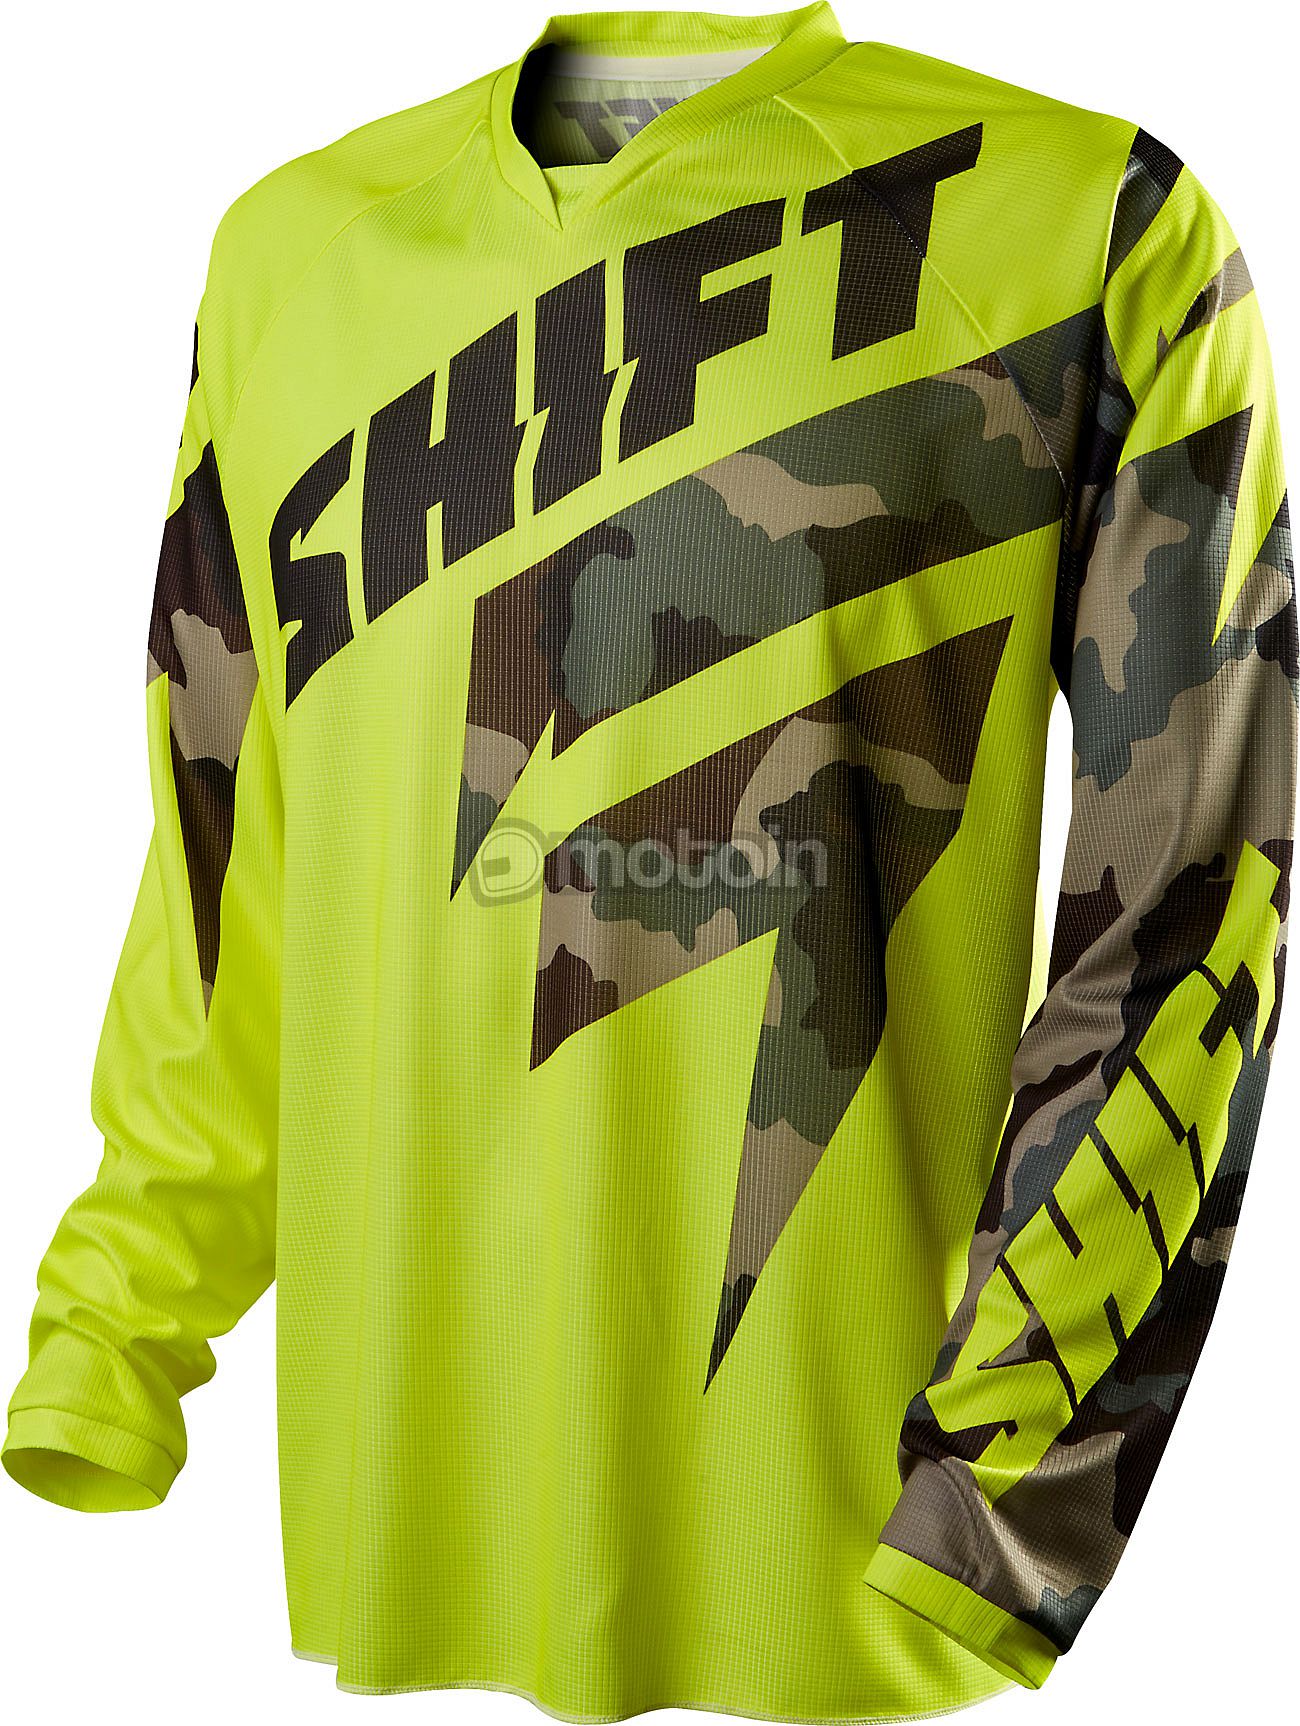 Shift Recon, jersey